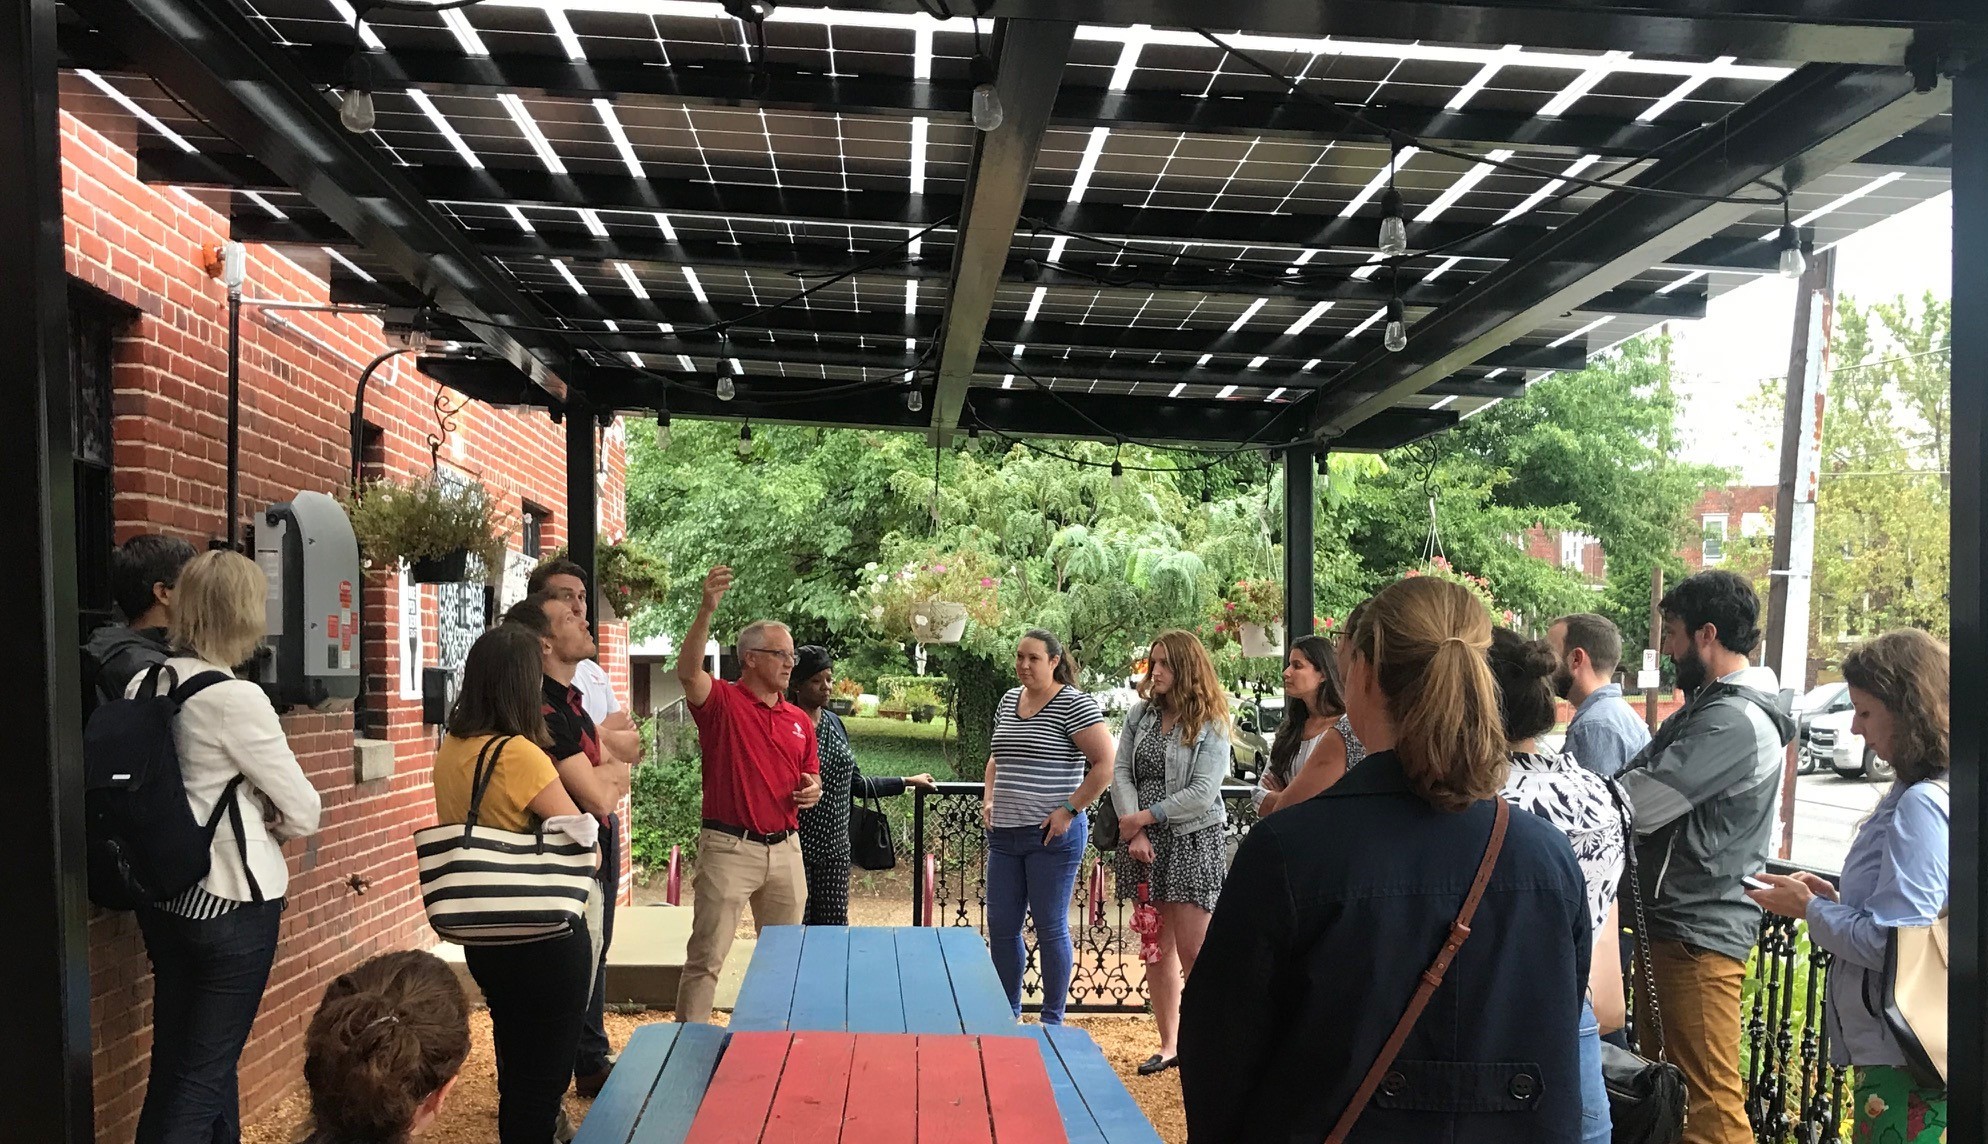 Attendees check out solar array at Right Proper Brewing Company